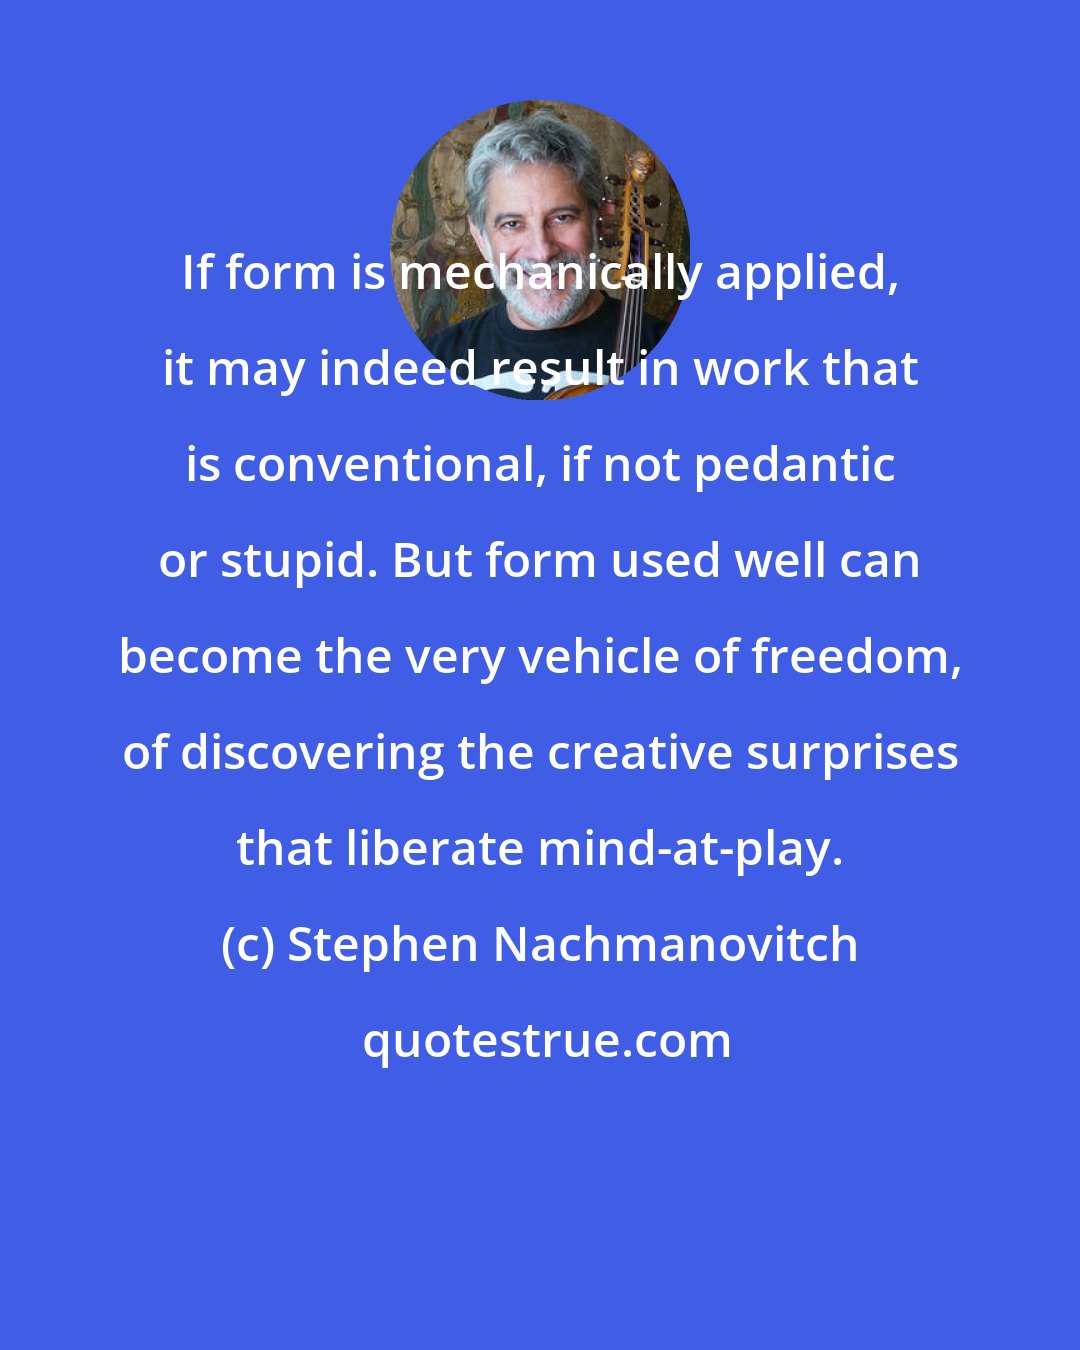 Stephen Nachmanovitch: If form is mechanically applied, it may indeed result in work that is conventional, if not pedantic or stupid. But form used well can become the very vehicle of freedom, of discovering the creative surprises that liberate mind-at-play.